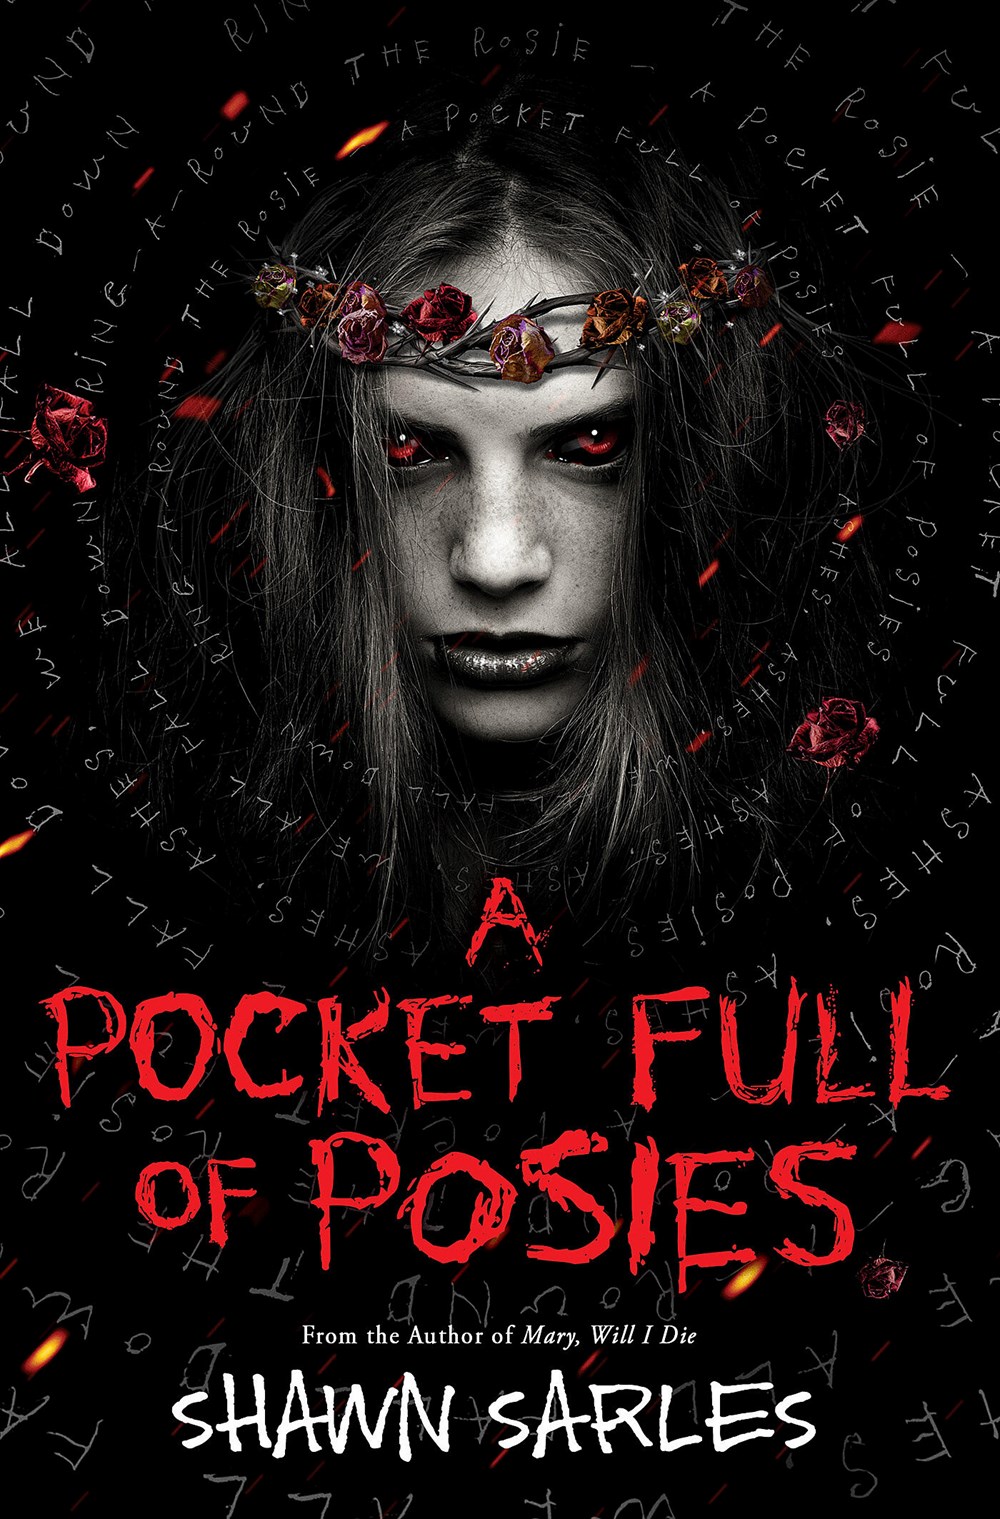 Spotlight on A Pocket Full of Posies (Shawn Sarles), Excerpt & Giveaway ~ US/CAN Only